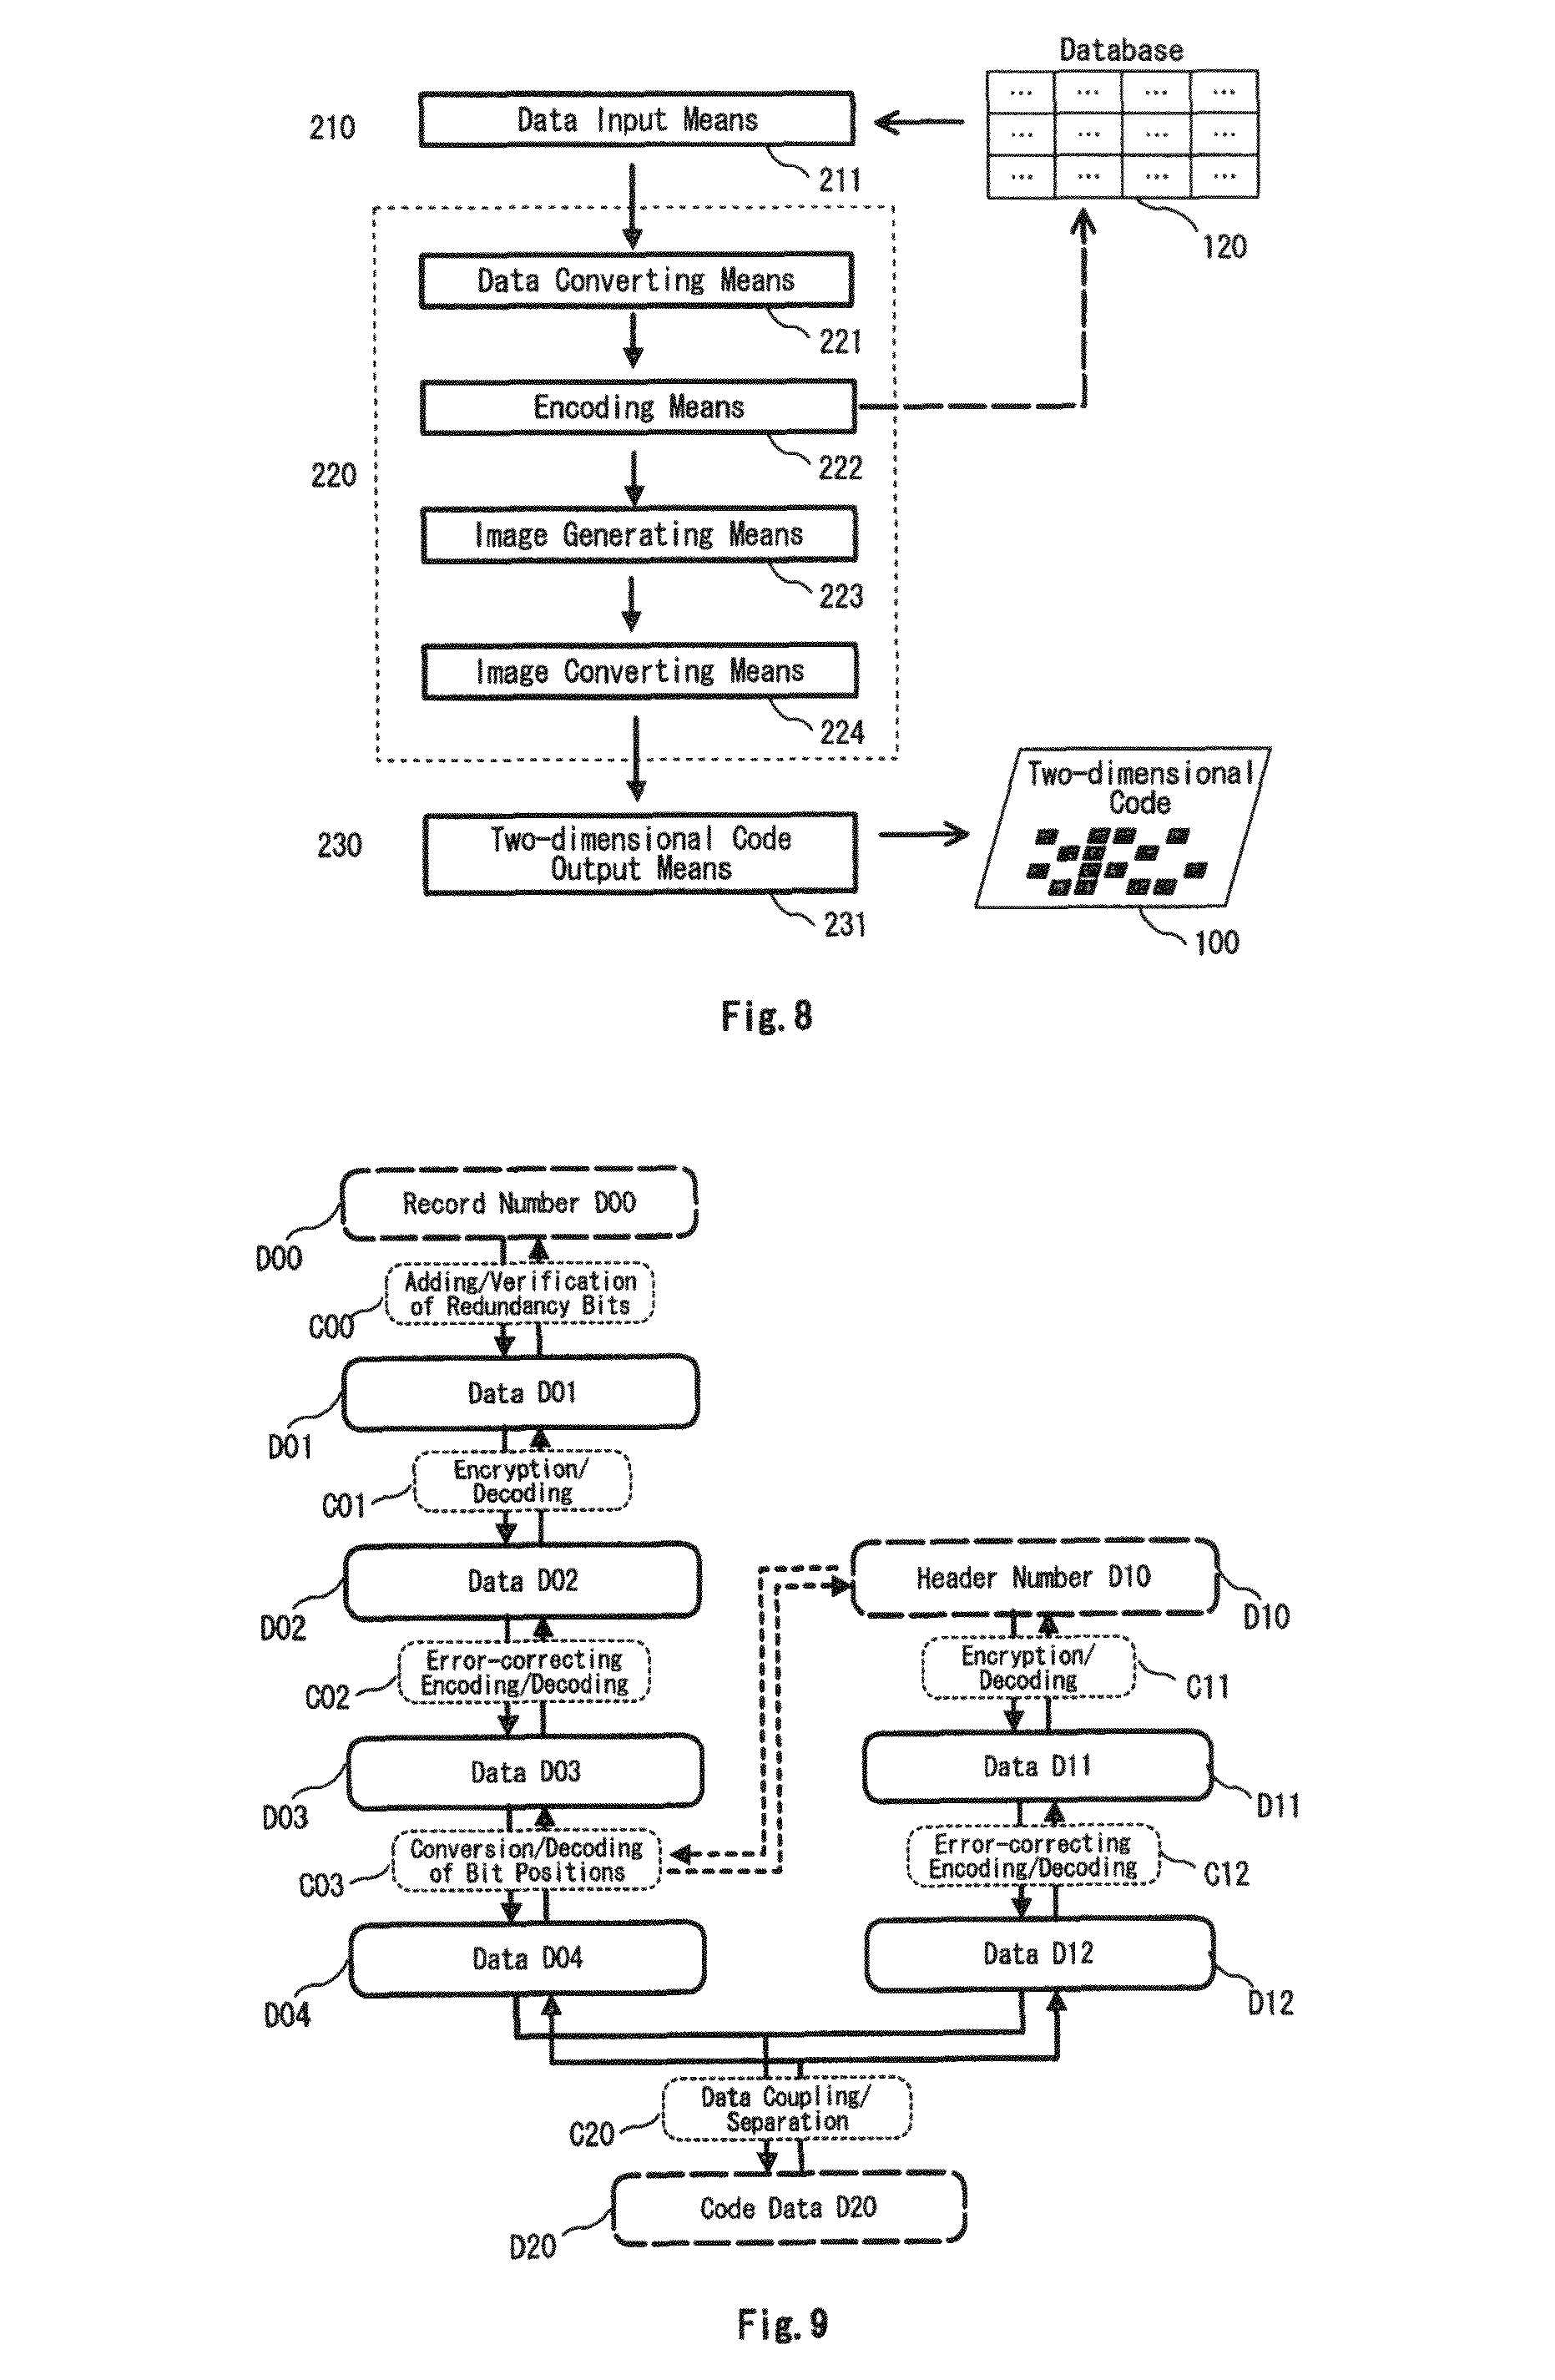 Two-dimensional code publishing program and two-dimensional code decoding program